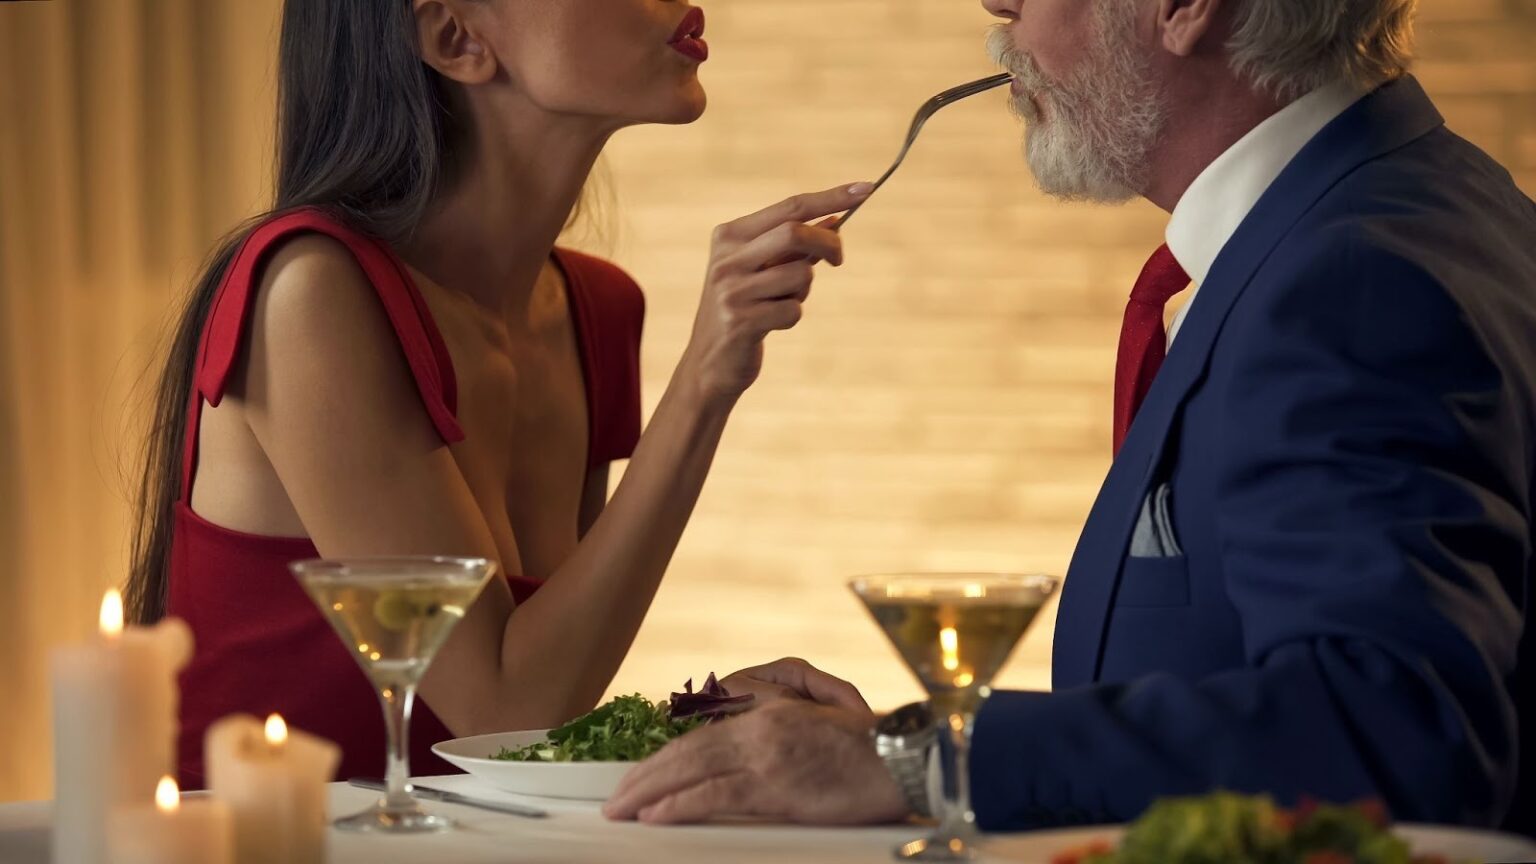 Whether you're delving for the first time or refreshing your sugar baby or sugar daddy profile, creating an eye-catching dating profile is key to success.